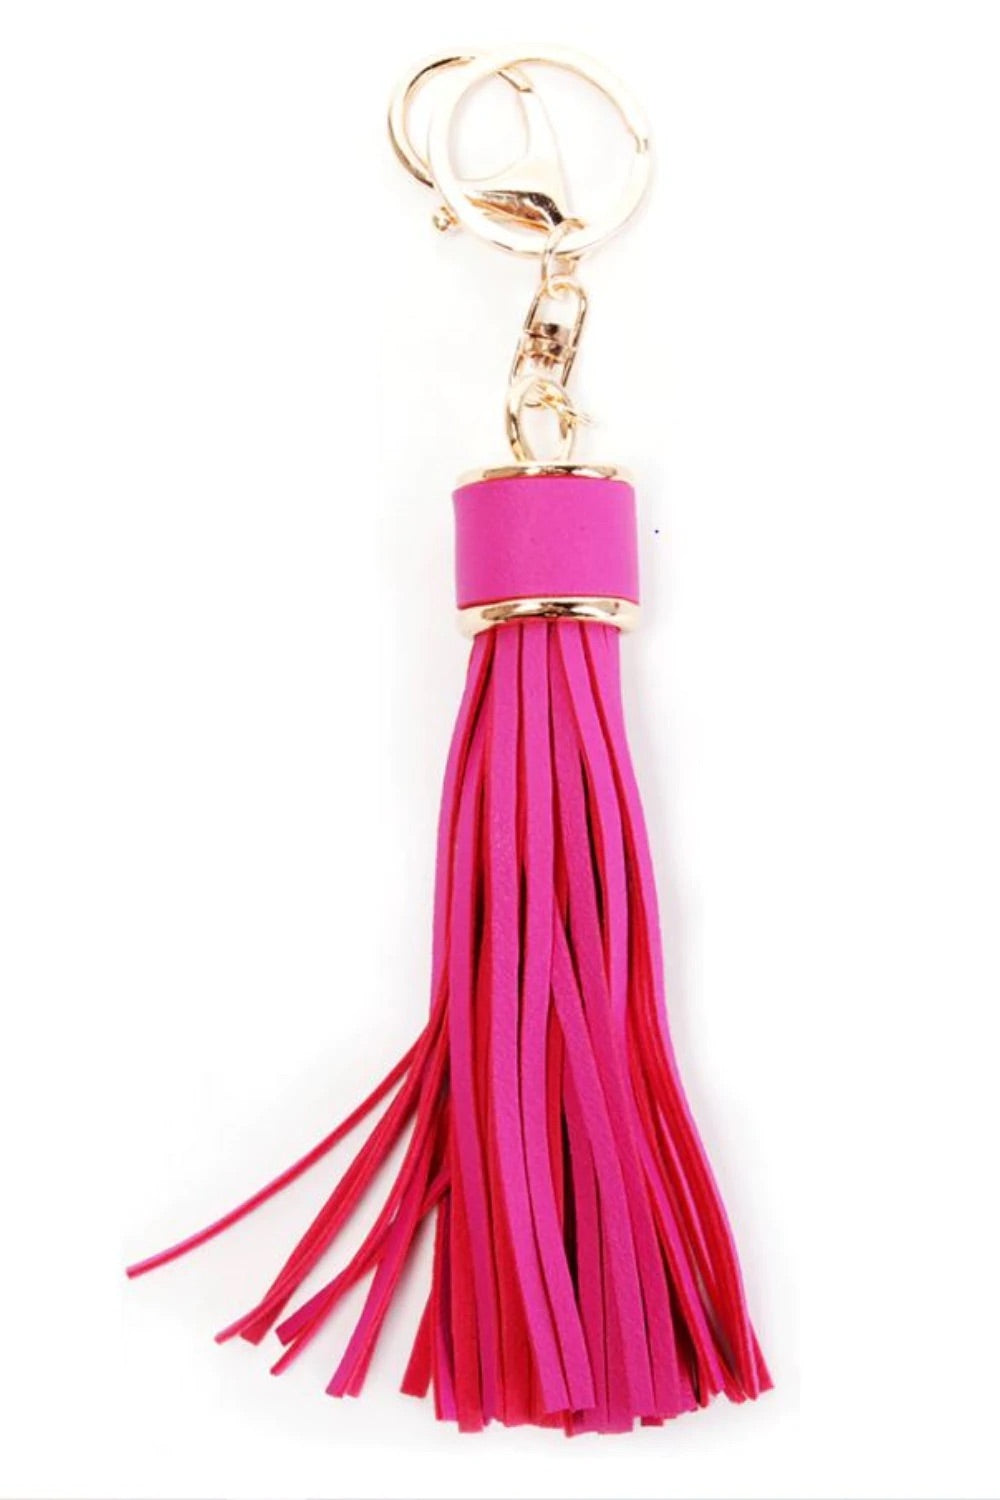 Pink leather tassle with gold details